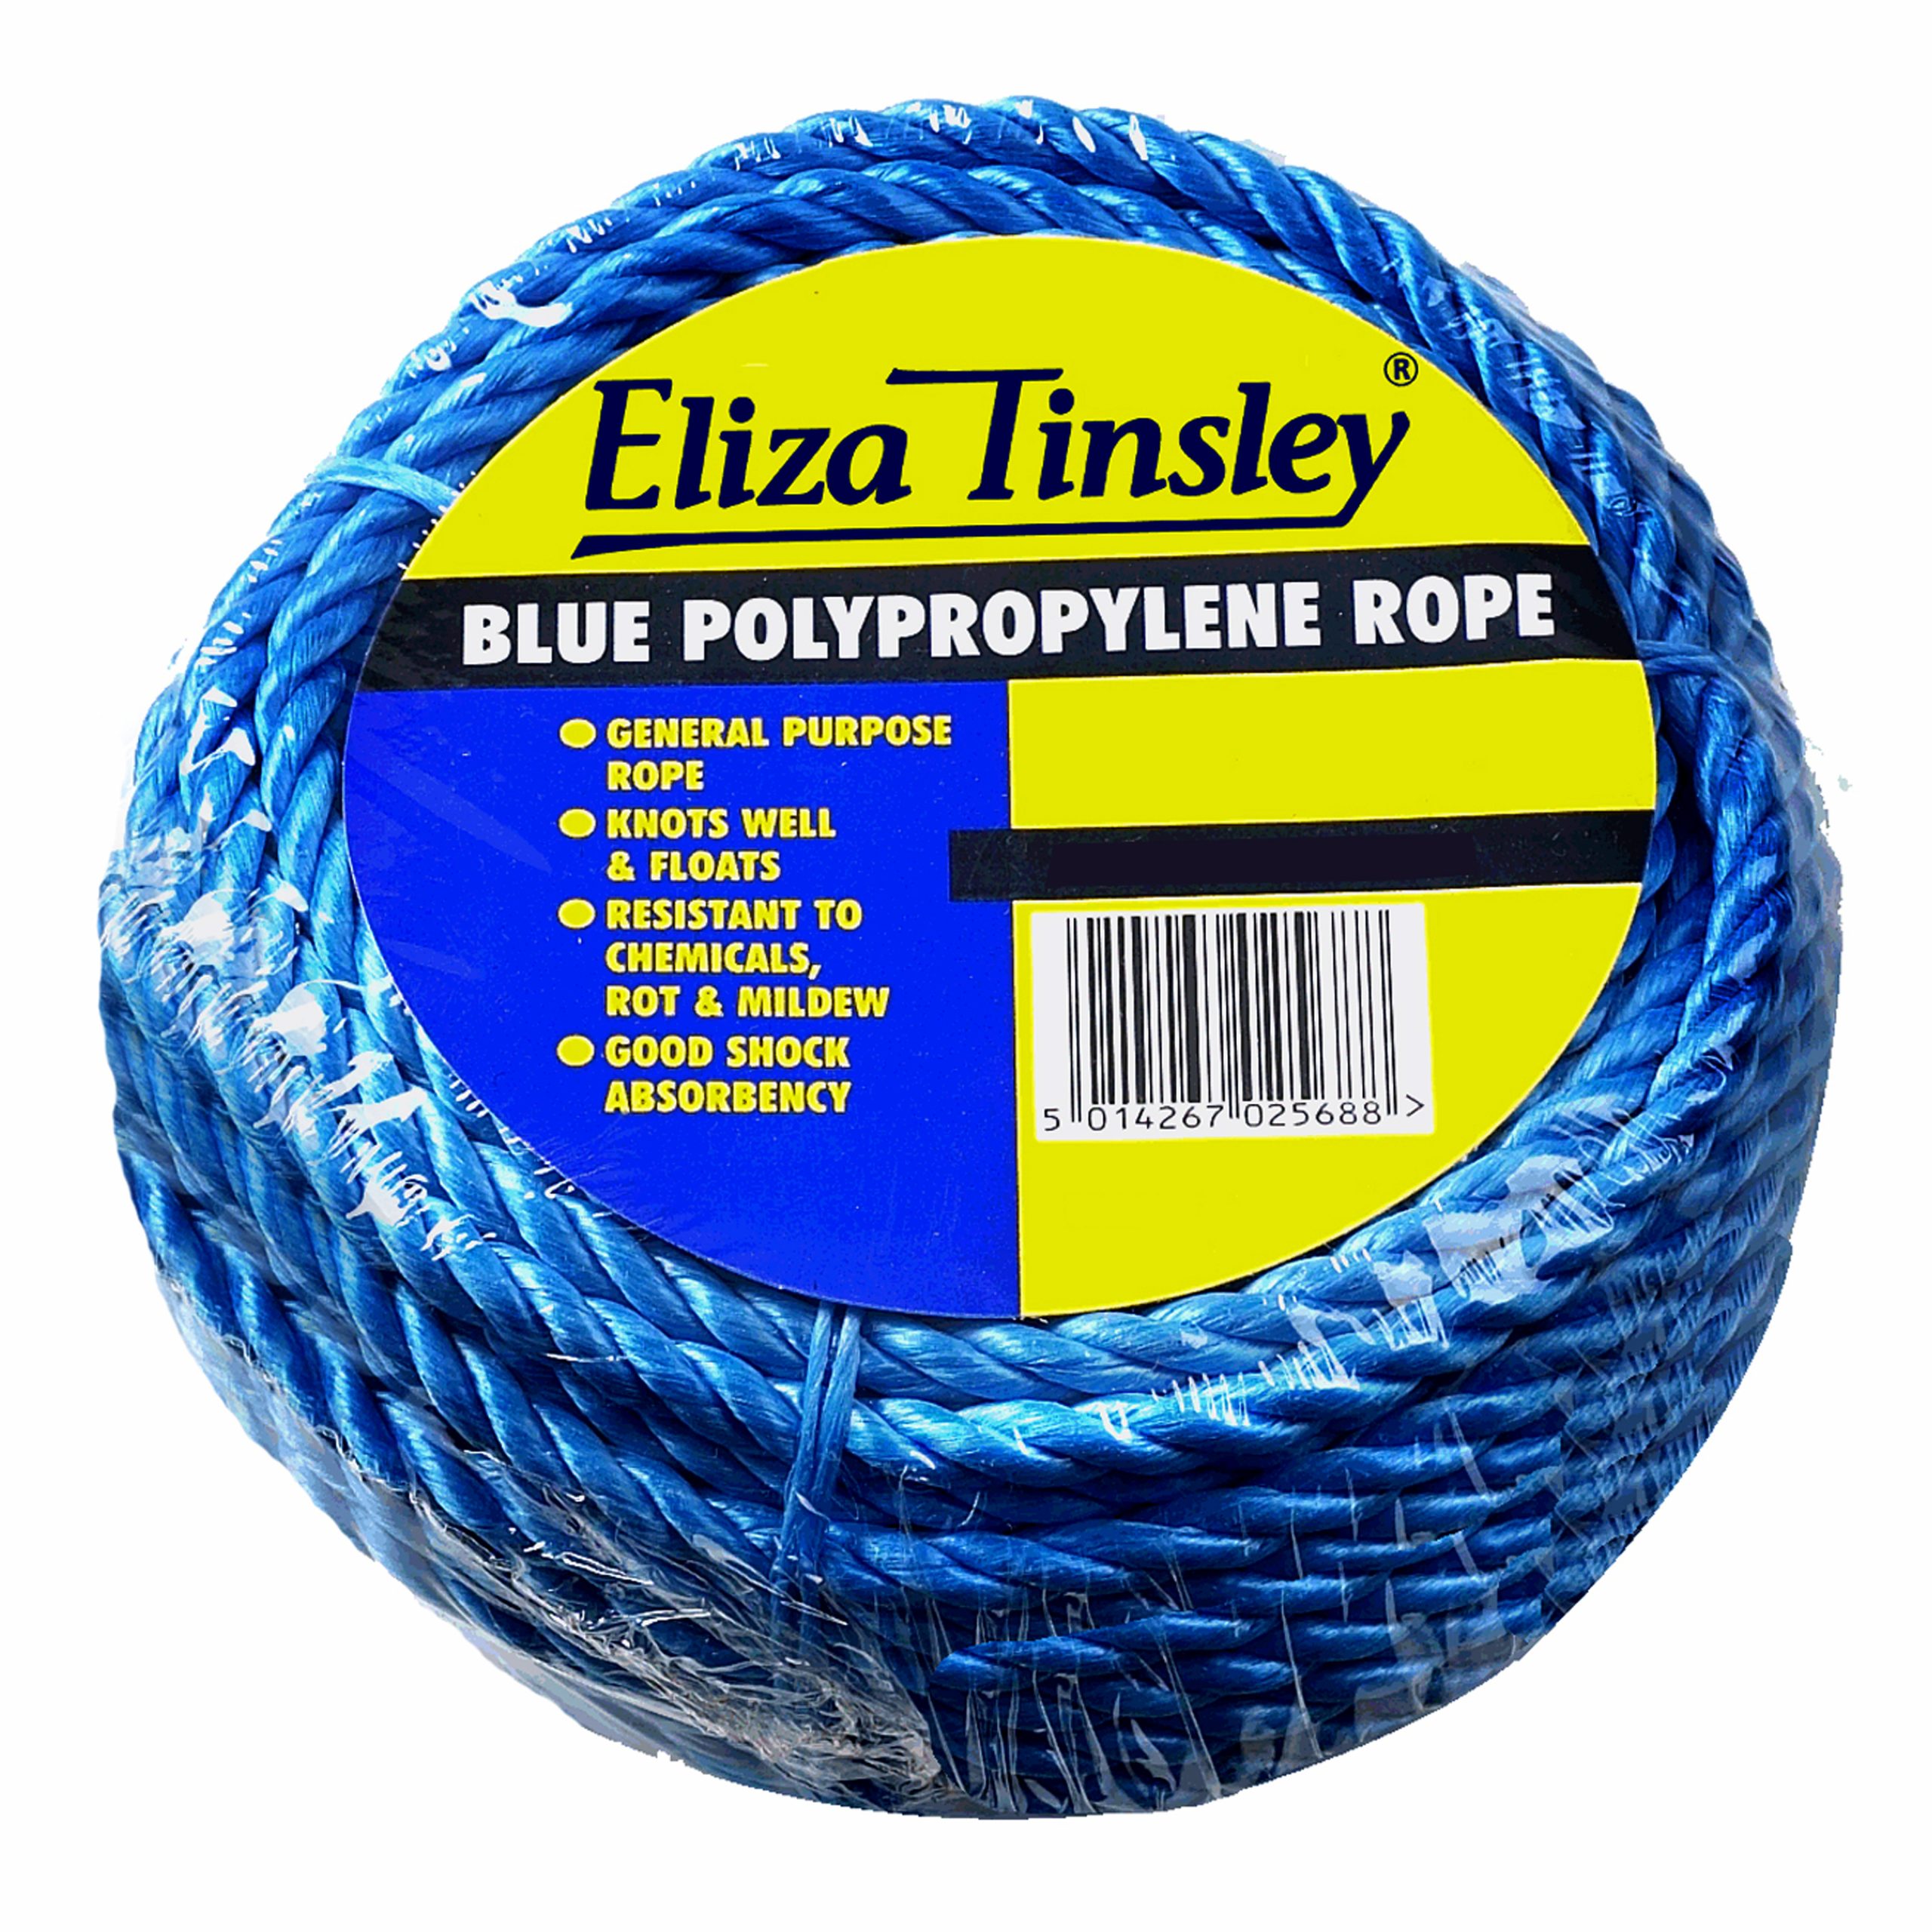 Multi-Purpose Blue Polypropylene Rope - Available in 7mm and 10mm Sizes